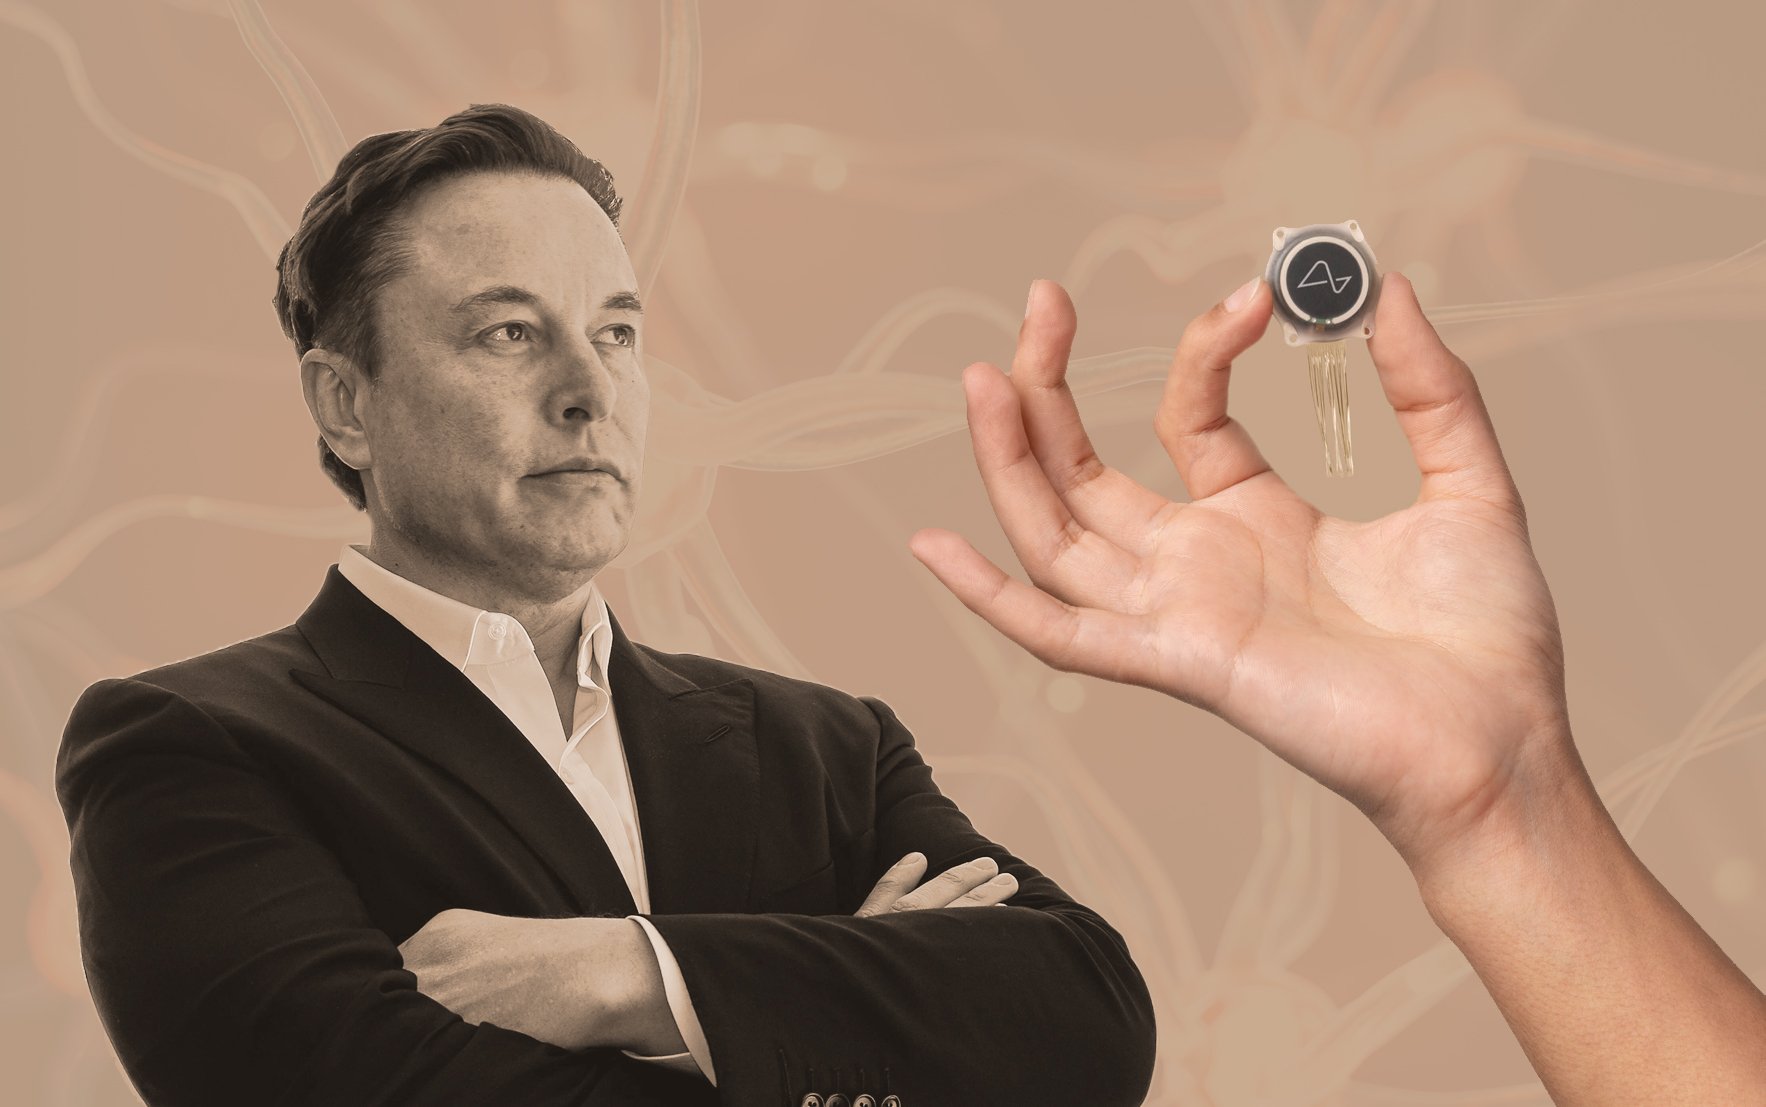 Elon Musk says his startup Neuralink has implanted a device in its